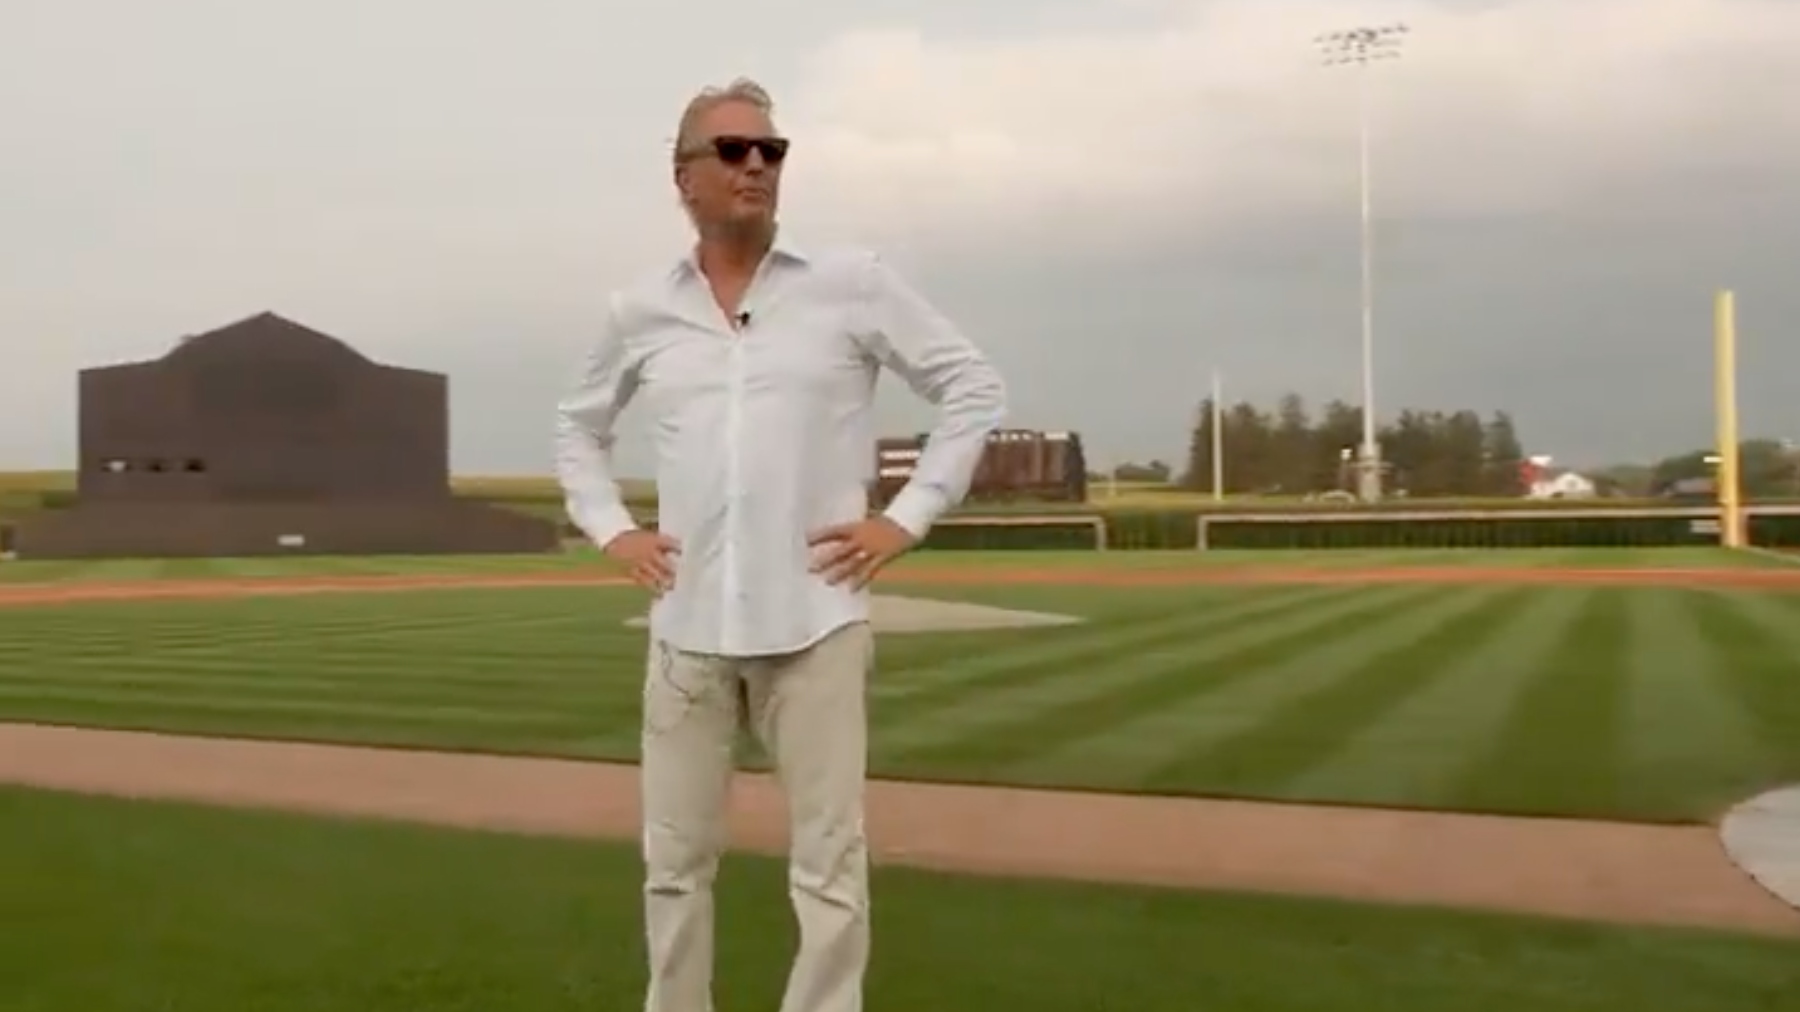 Field Dreams: Kevin Costner plays catch before vs White - Illustrated